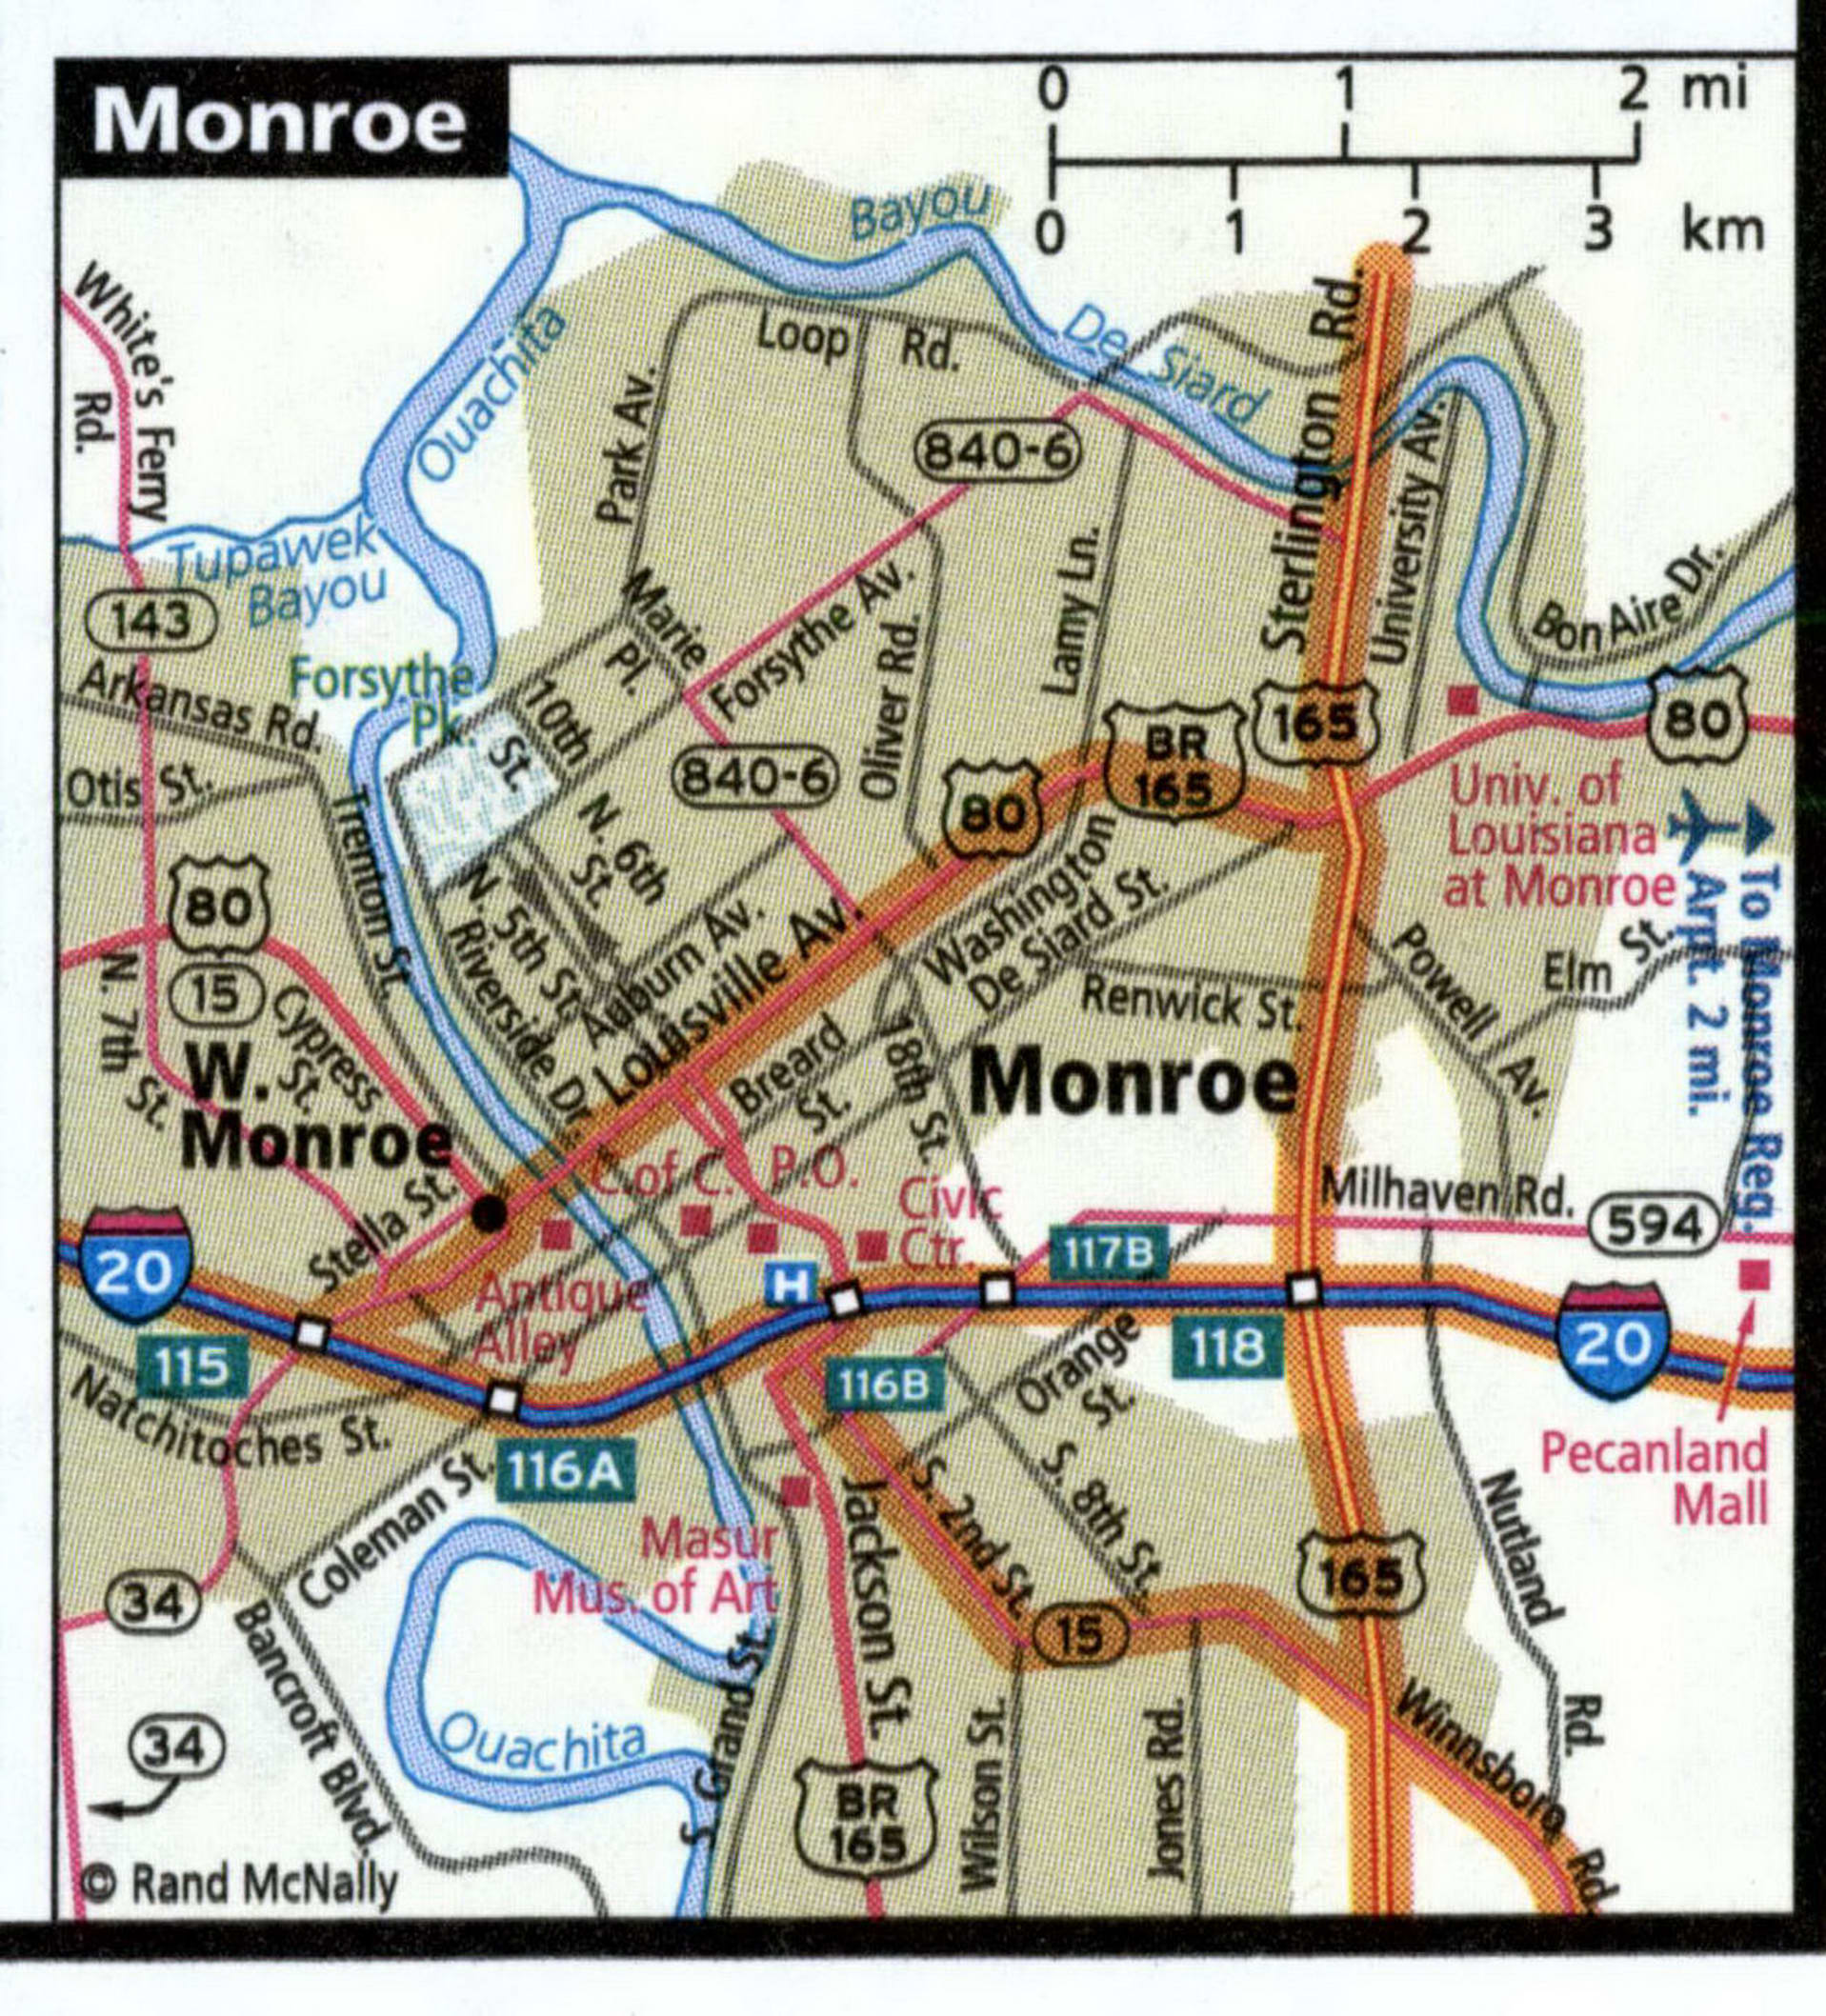 Monroe map for truckers